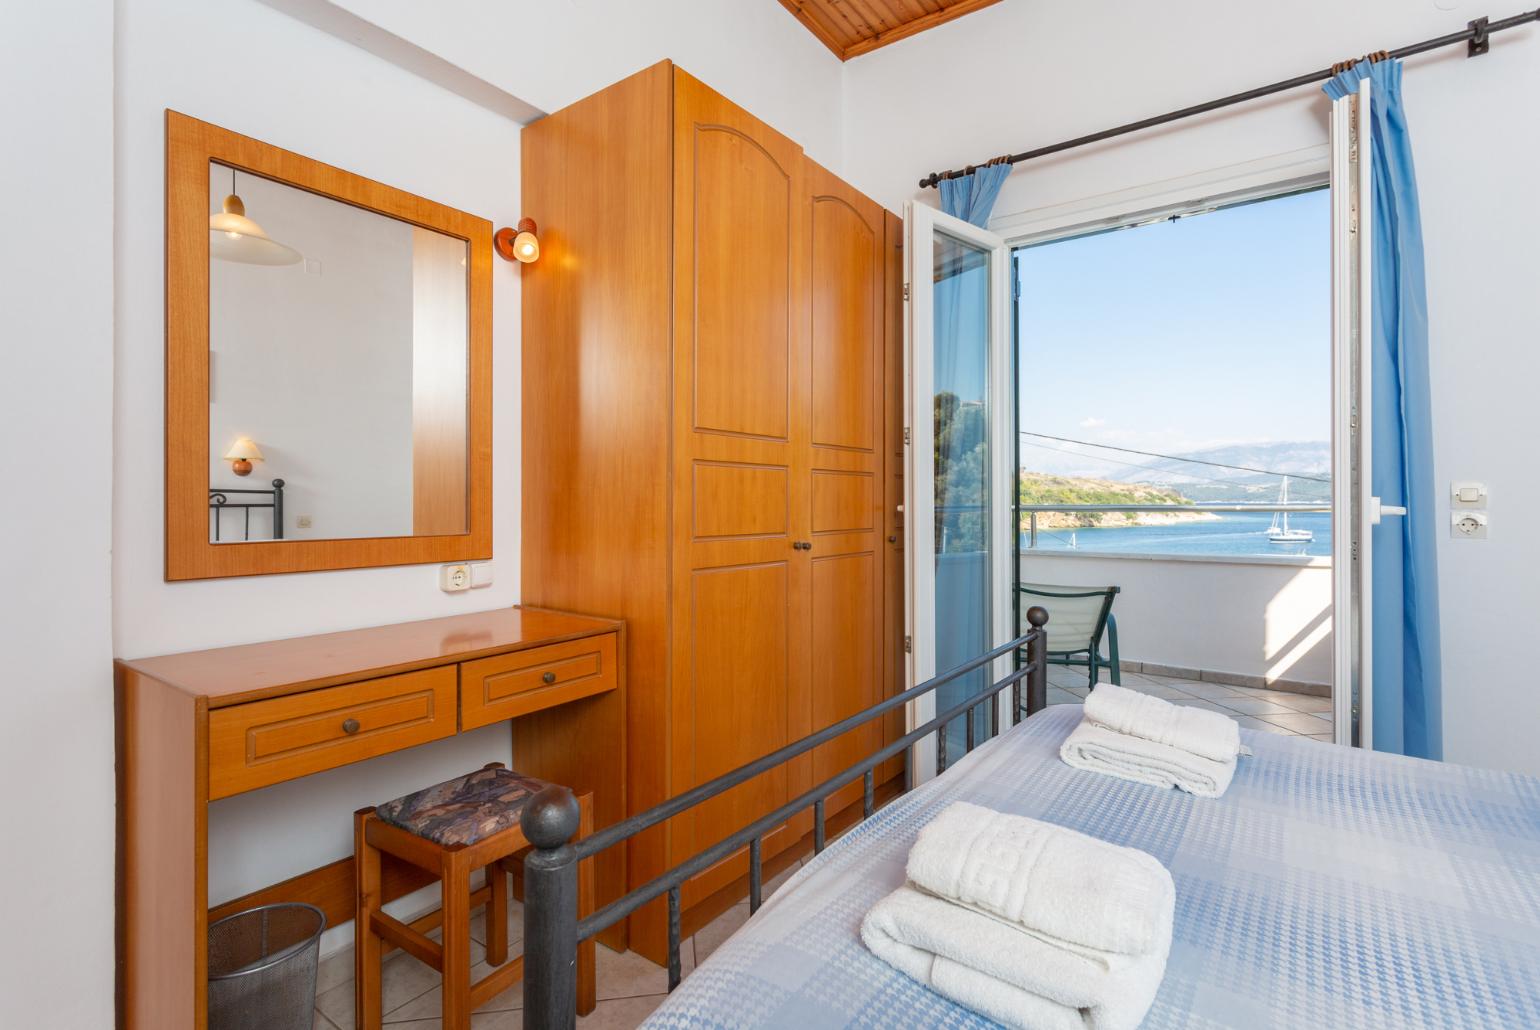 Double bedroom with A/C, and terrace access with sea views